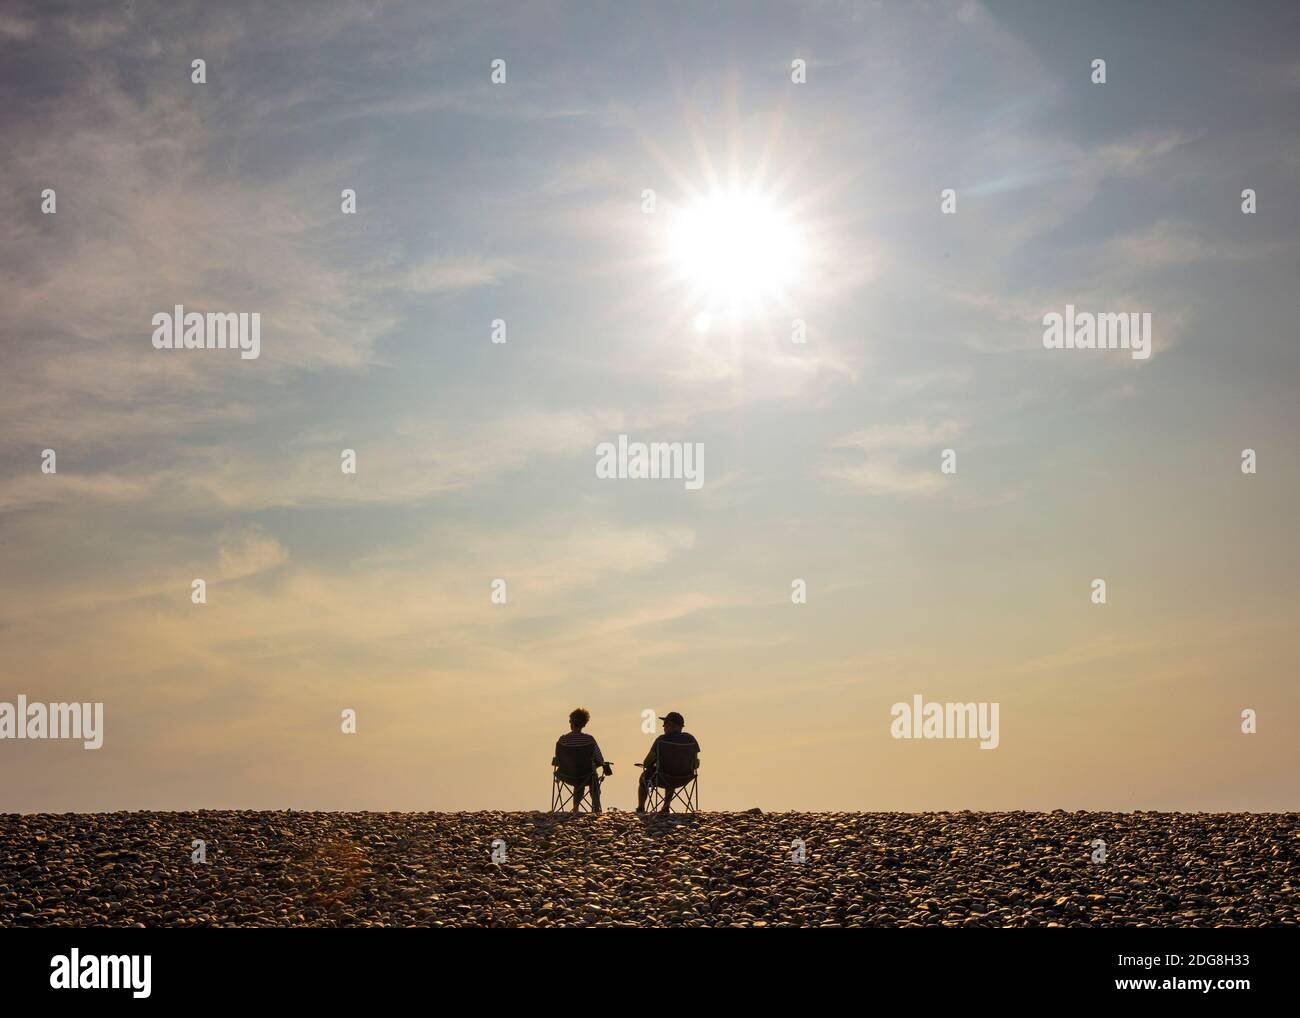 A couple in silhouette, sitting, relaxing on a beach under a full sun Stock Photo